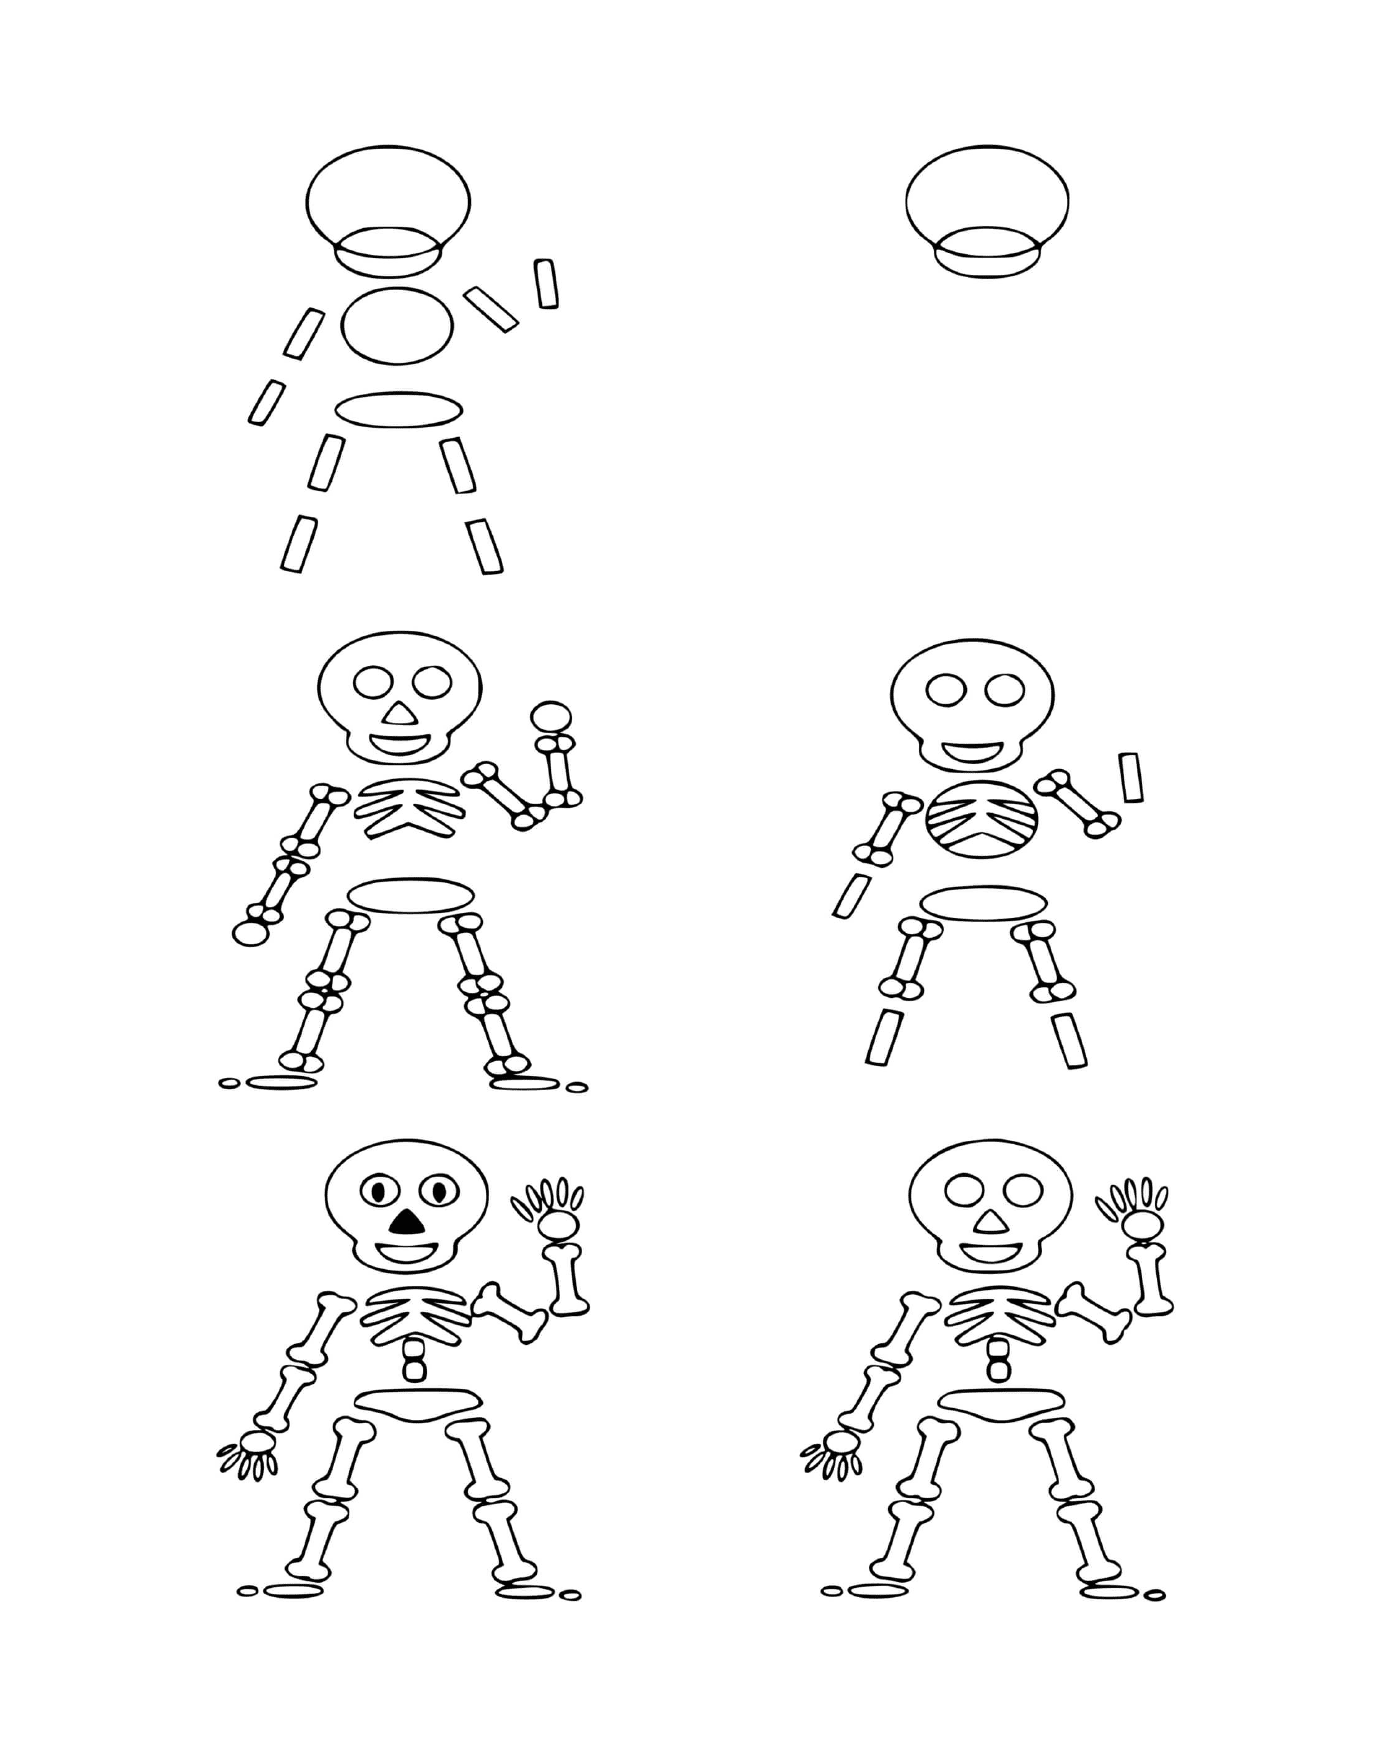  How to draw a skeleton 